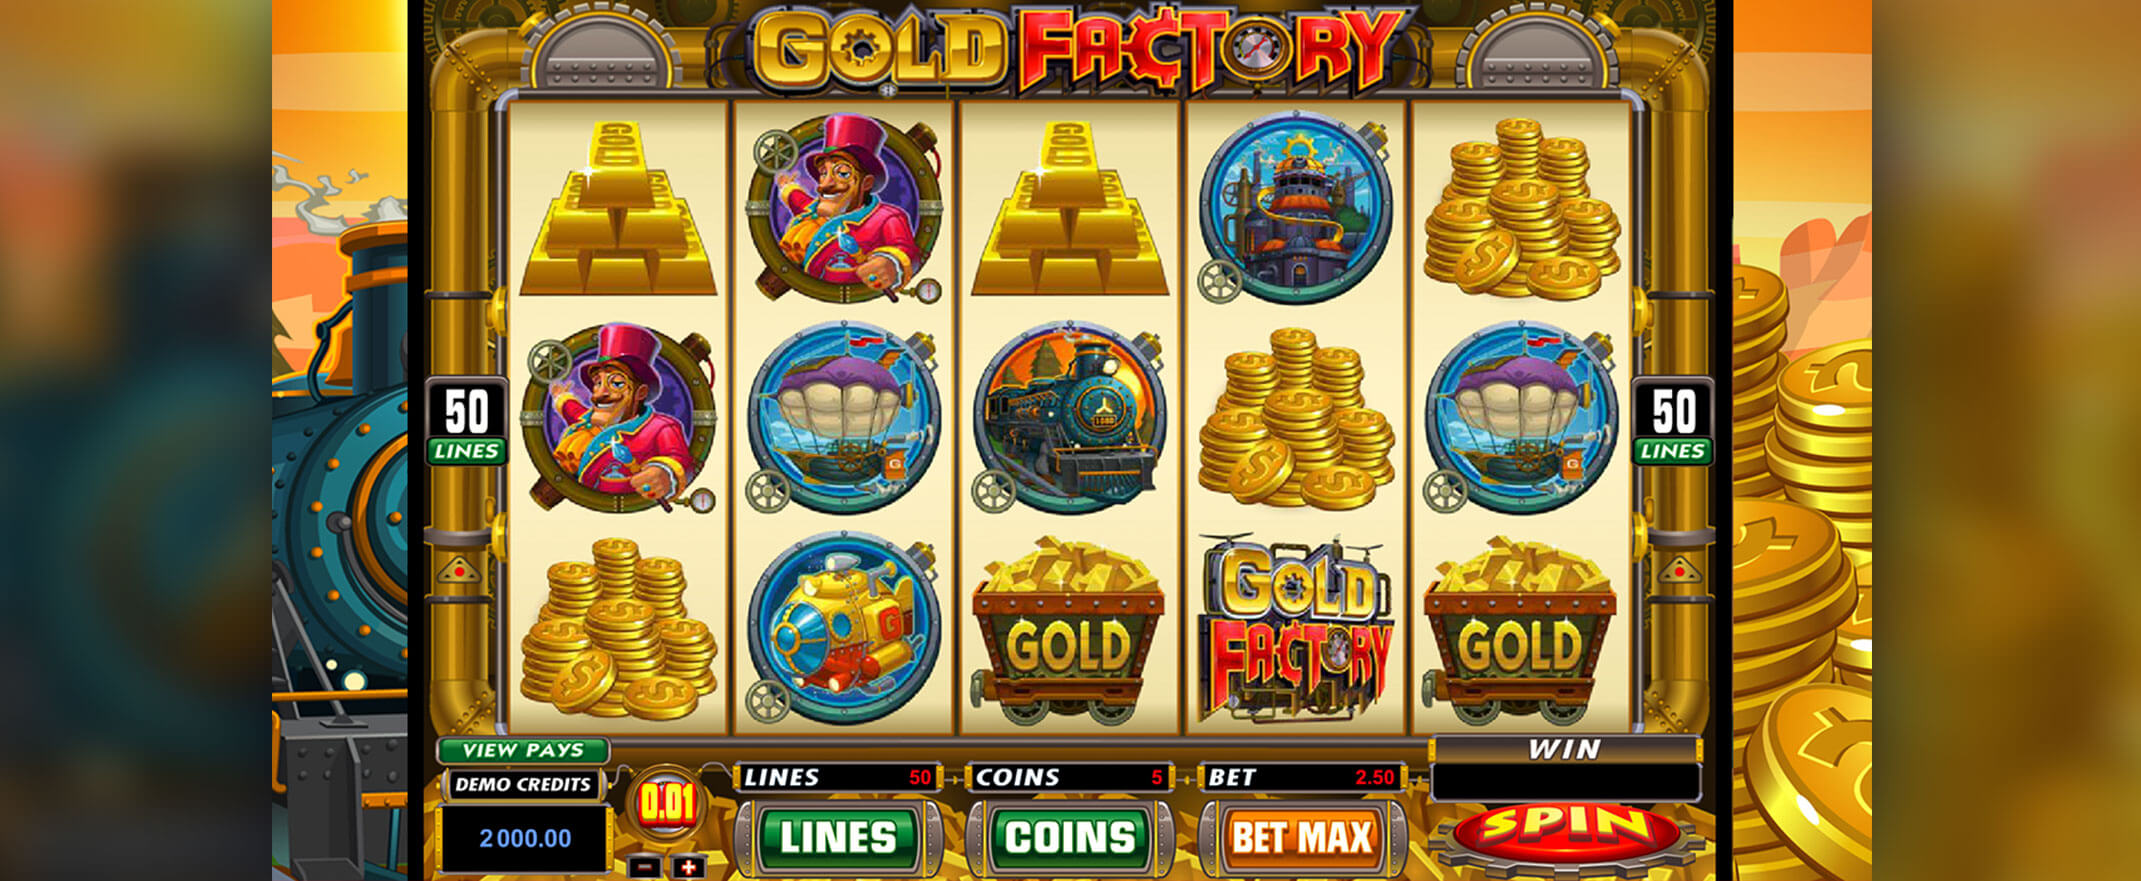 Gold Factory slot by Microgaming